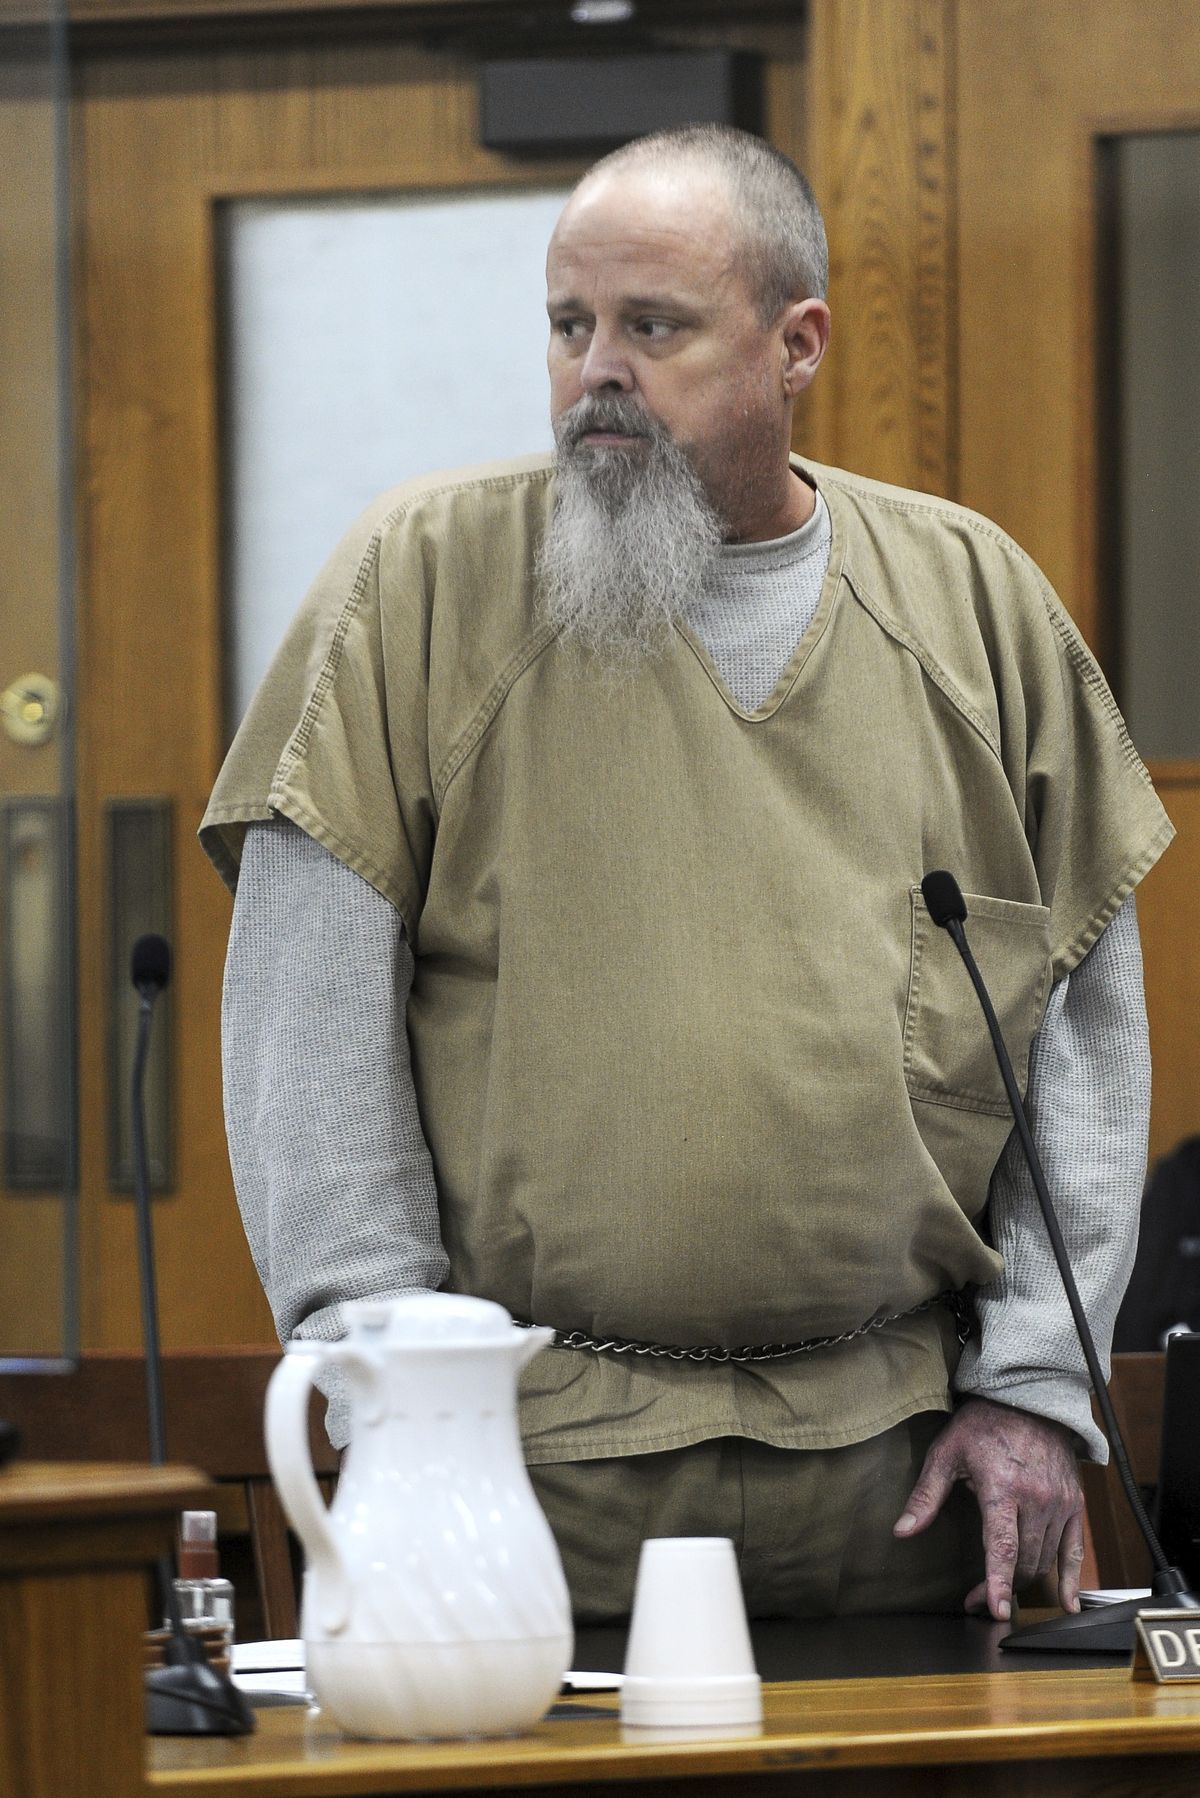 Brian Leigh Dripps Sr. glances over to members of the Dodge family as he makes a statement during his sentencing in Idaho Falls, Idaho on Tuesday, June 8, 2021. Eighteen-year-old Angie Dodge was raped and killed in her Idaho home a quarter-century ago and an innocent man wrongly served 20 years in prison for the crime. On Tuesday, the man authorities say is the real killer was sentenced to life in prison. Fifty-five-year-old Brian Leigh Dripps Sr. must serve at least 20 years in prison before he will be eligible for parole.  (Monte LaOrange)